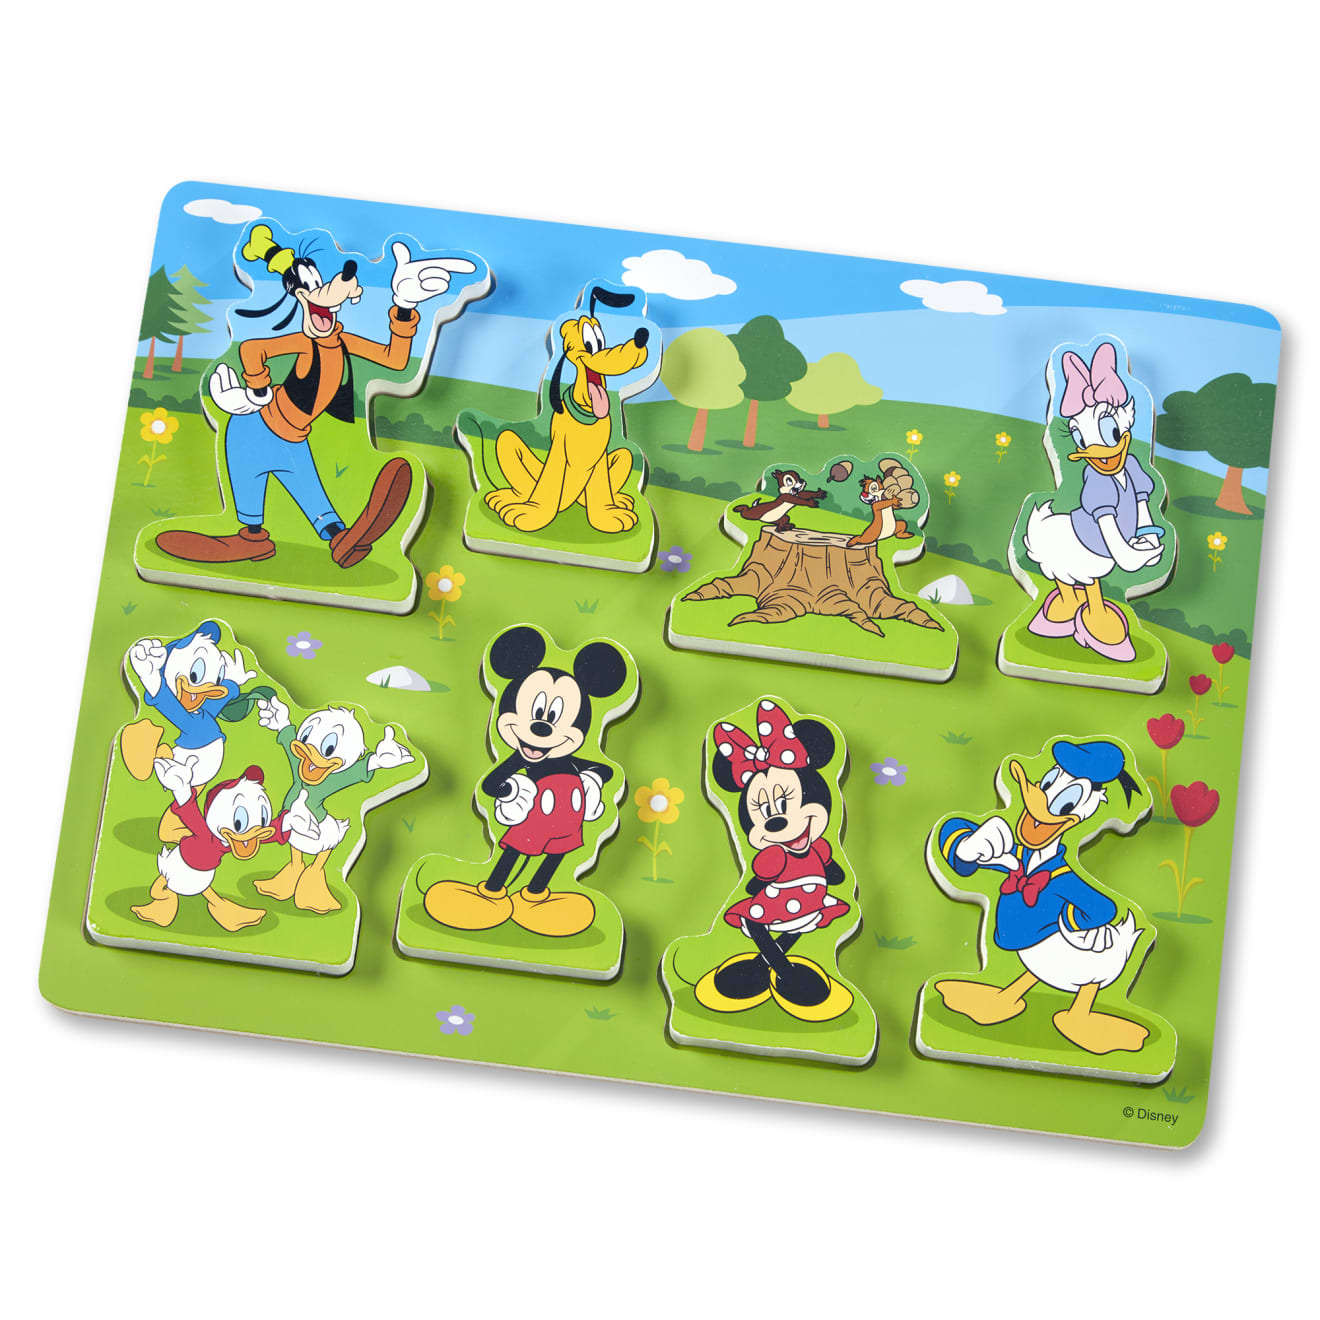 Disney Mickey Mouse Wooden Chunky Puzzle